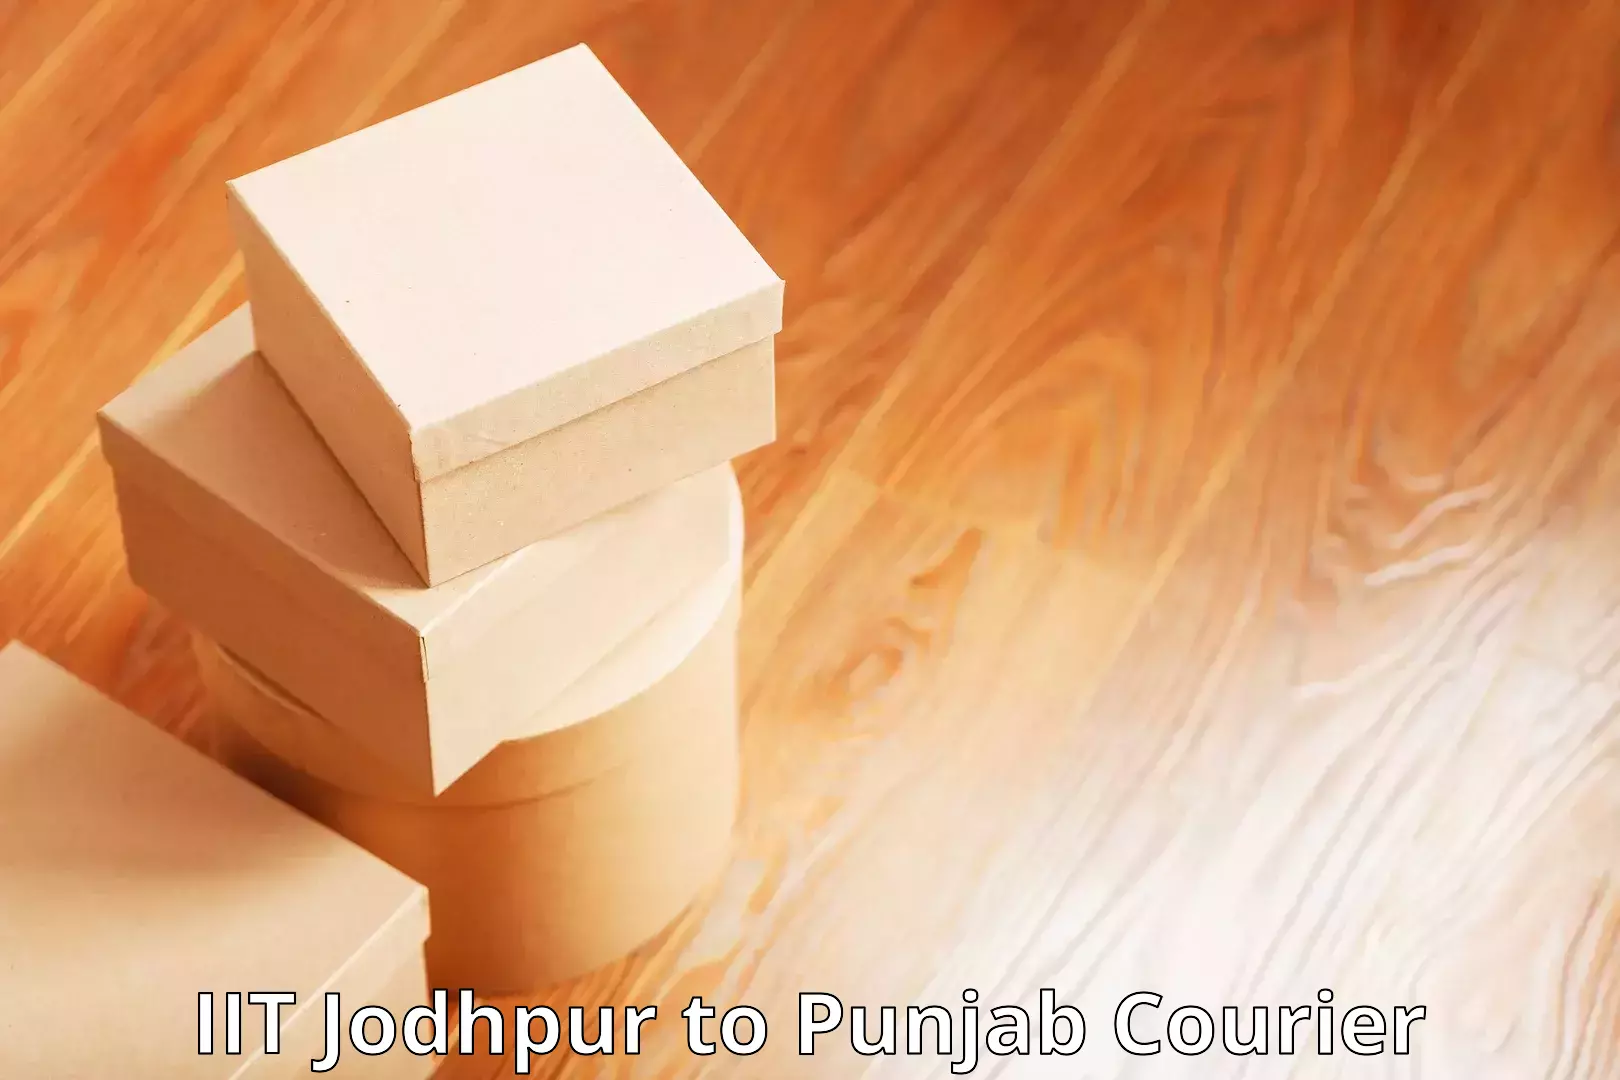 On-time delivery services in IIT Jodhpur to Mohali